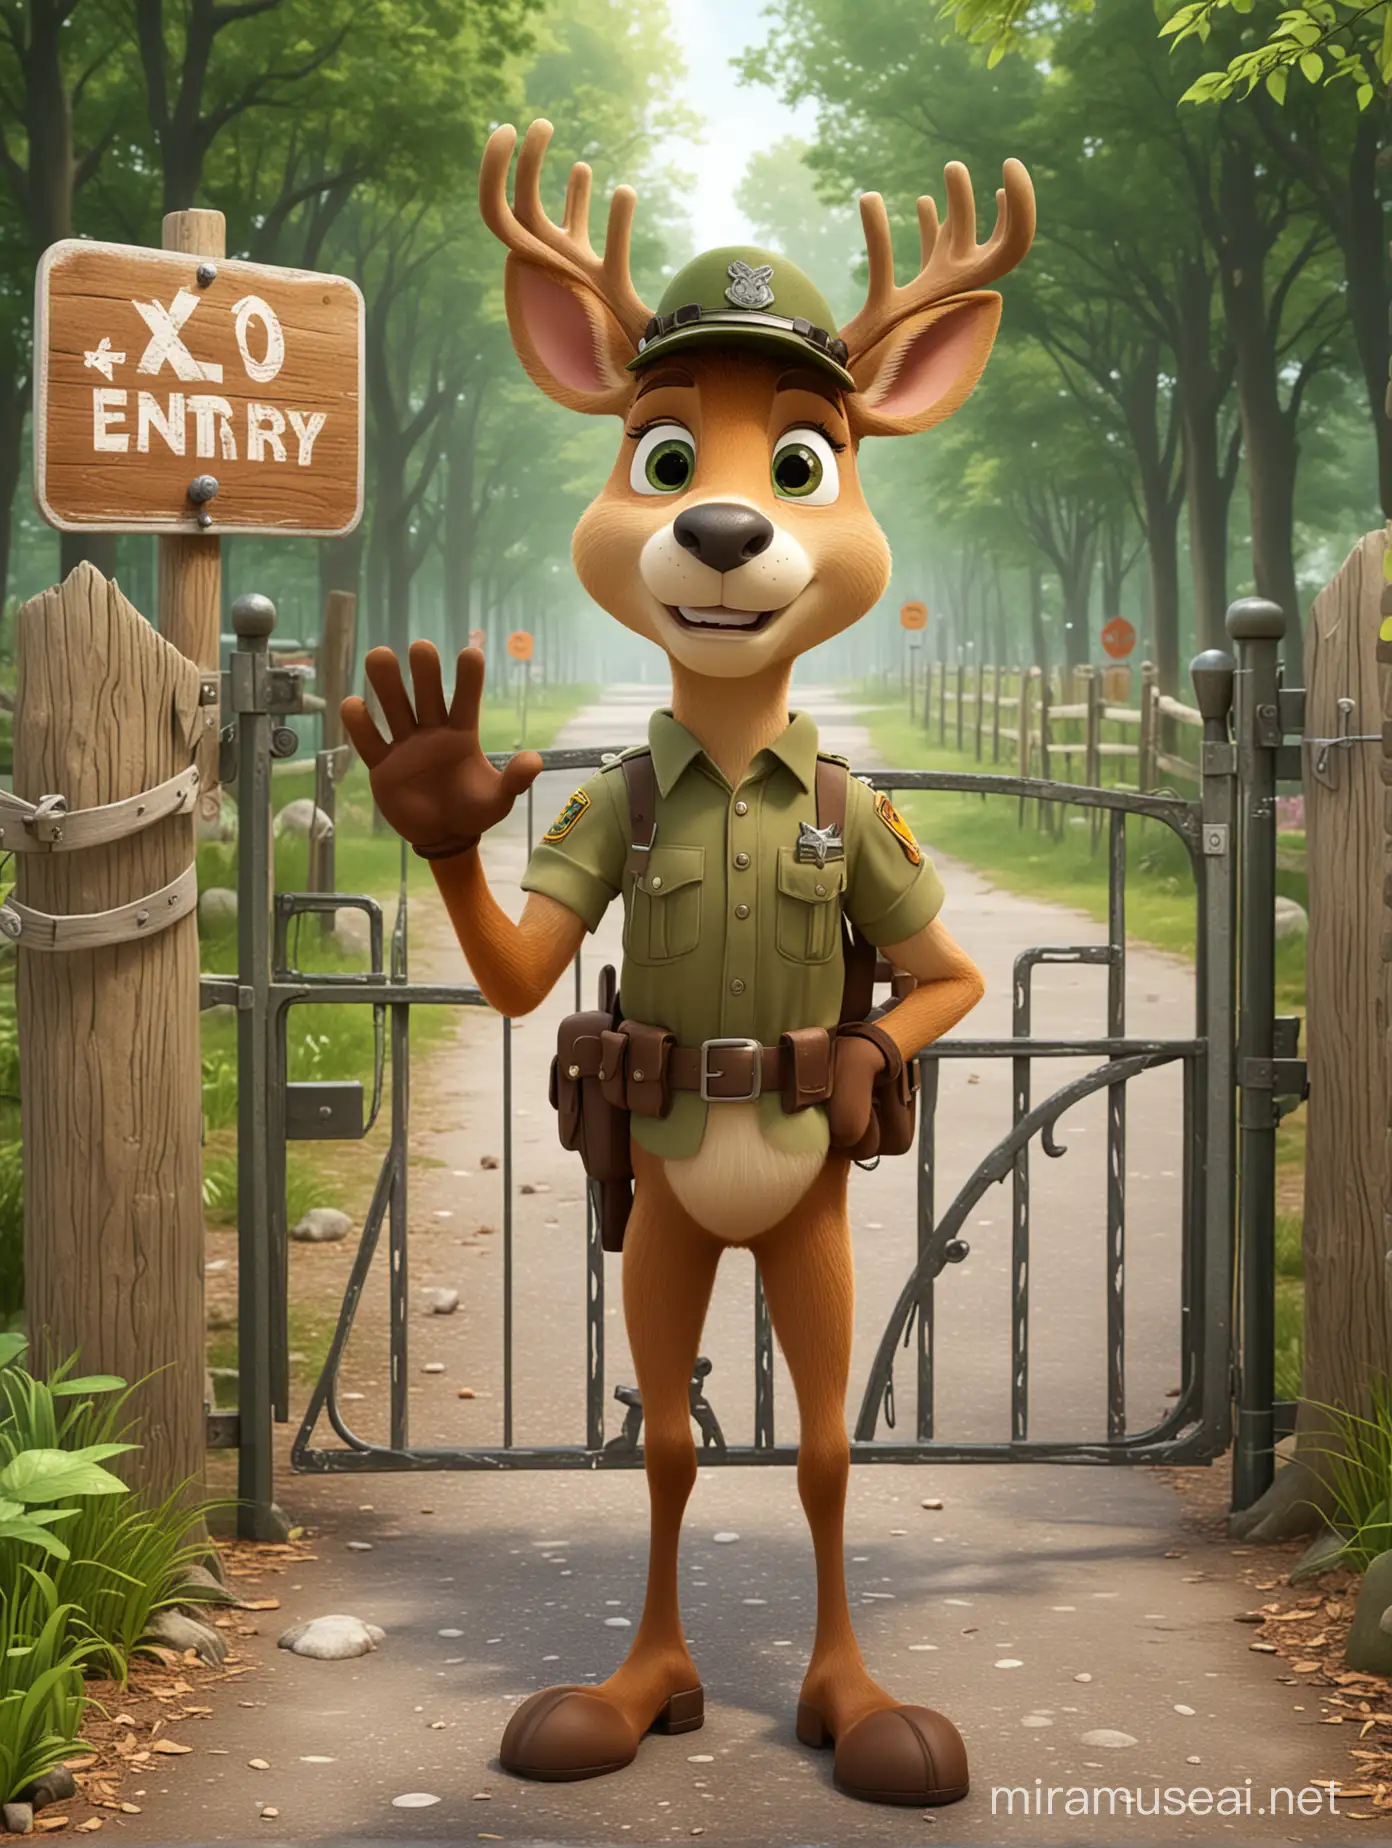 A 3D cartoon illustration showing an animated deer figure showing with X hands that there is no entry.  The character should be dressed in the uniform of a forest ranger for deer with white spots on his face and green eyes. The background should be a closed entrance gate to the park and on the gate there should be a No Entry sign.  